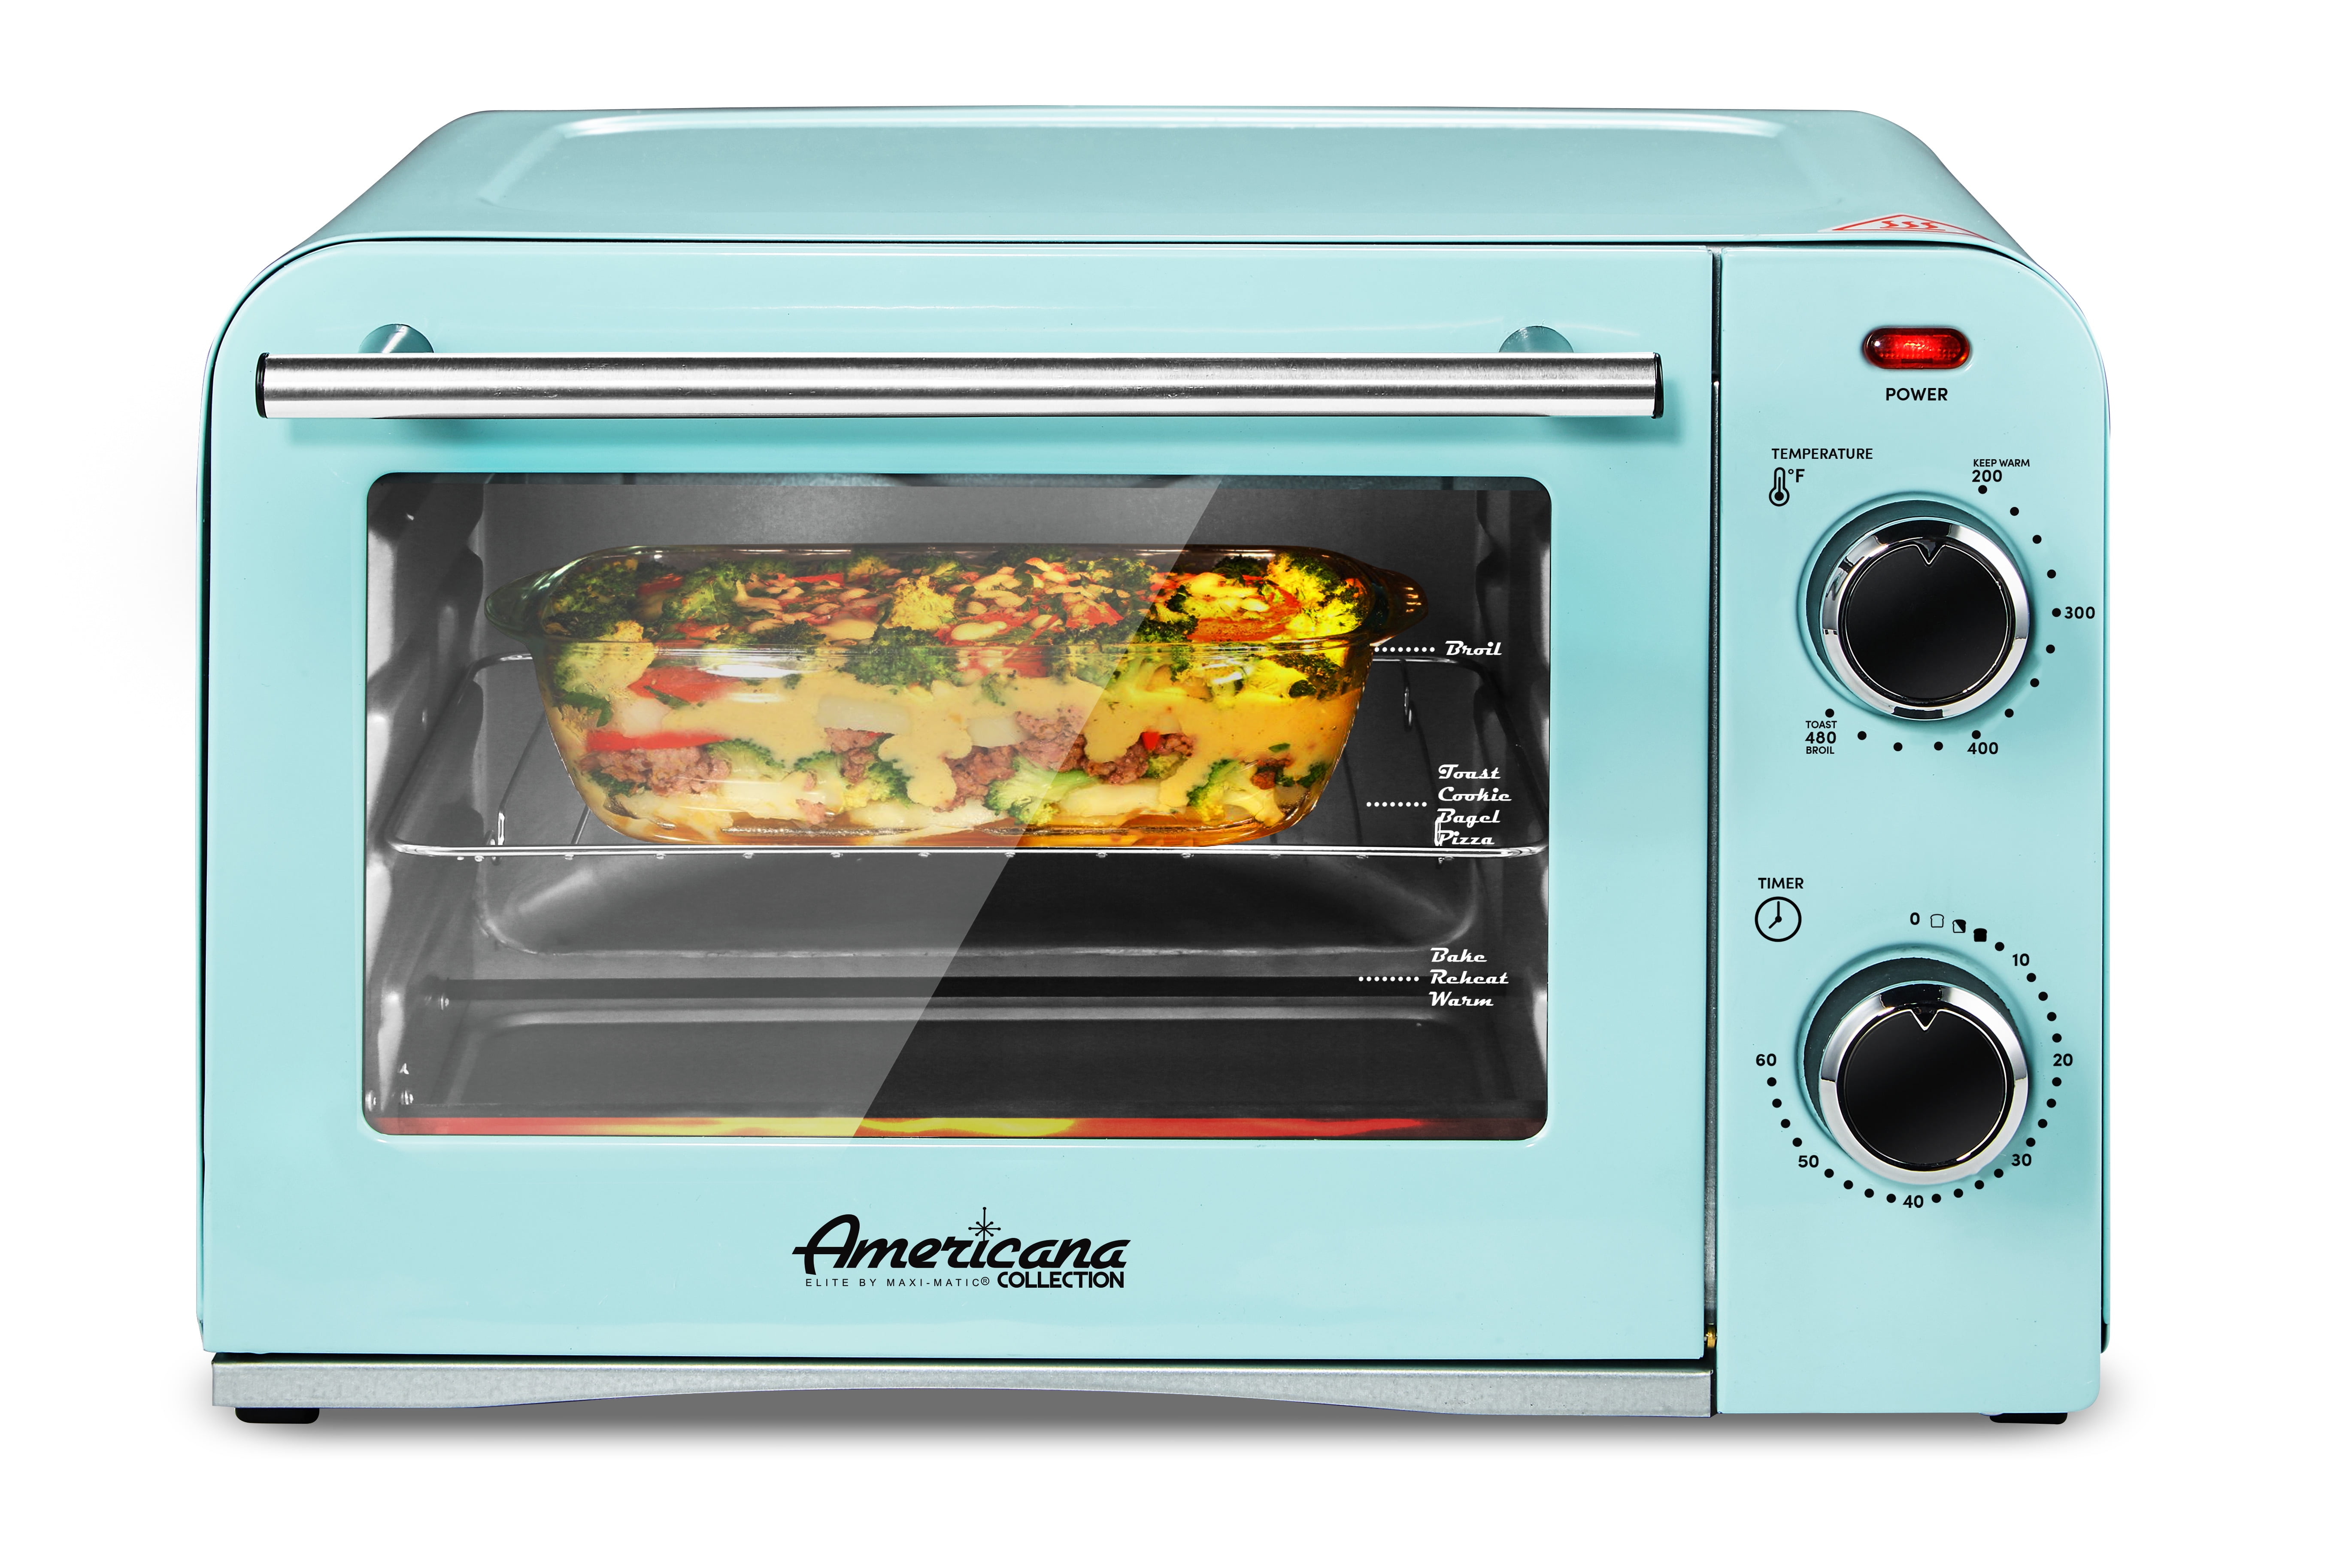 Details about  / Pizza Toaster Oven Baking Nostalgia RTOV2RR Large-Capacity 0.7-Cu Ft Capacity